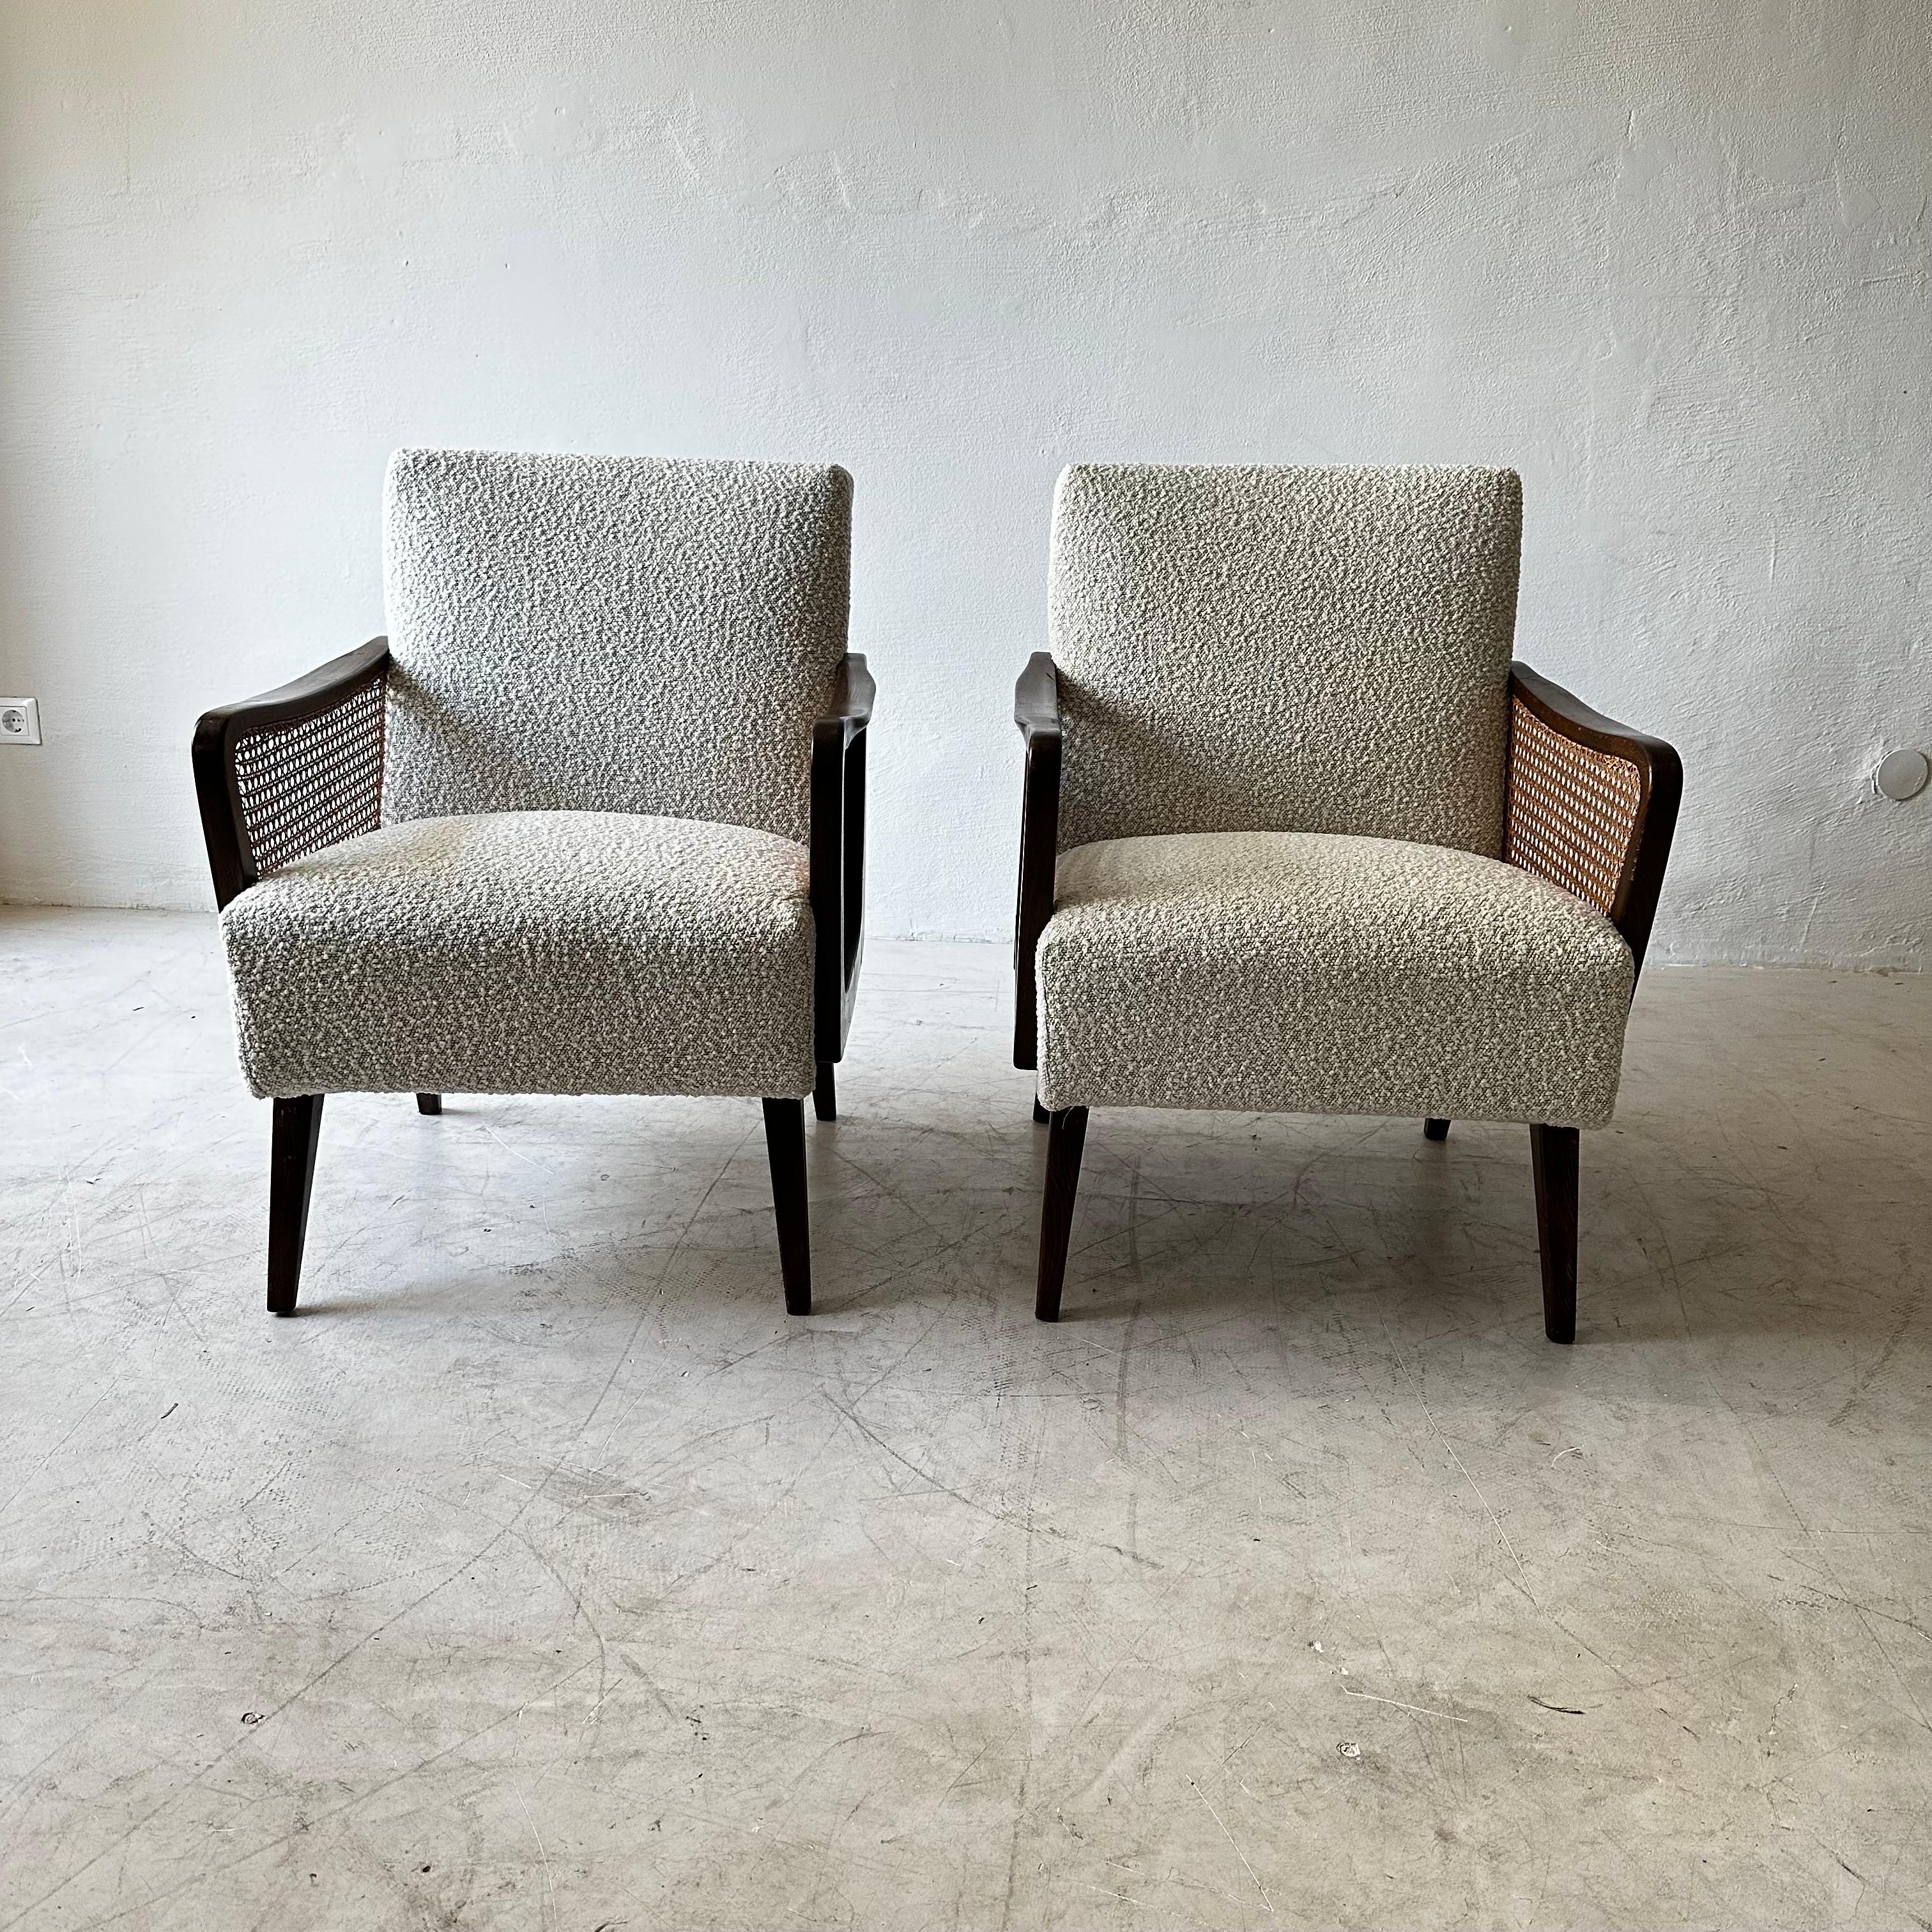 Austrian Arm Chairs in Boucle and Wicker, 1950s For Sale 2